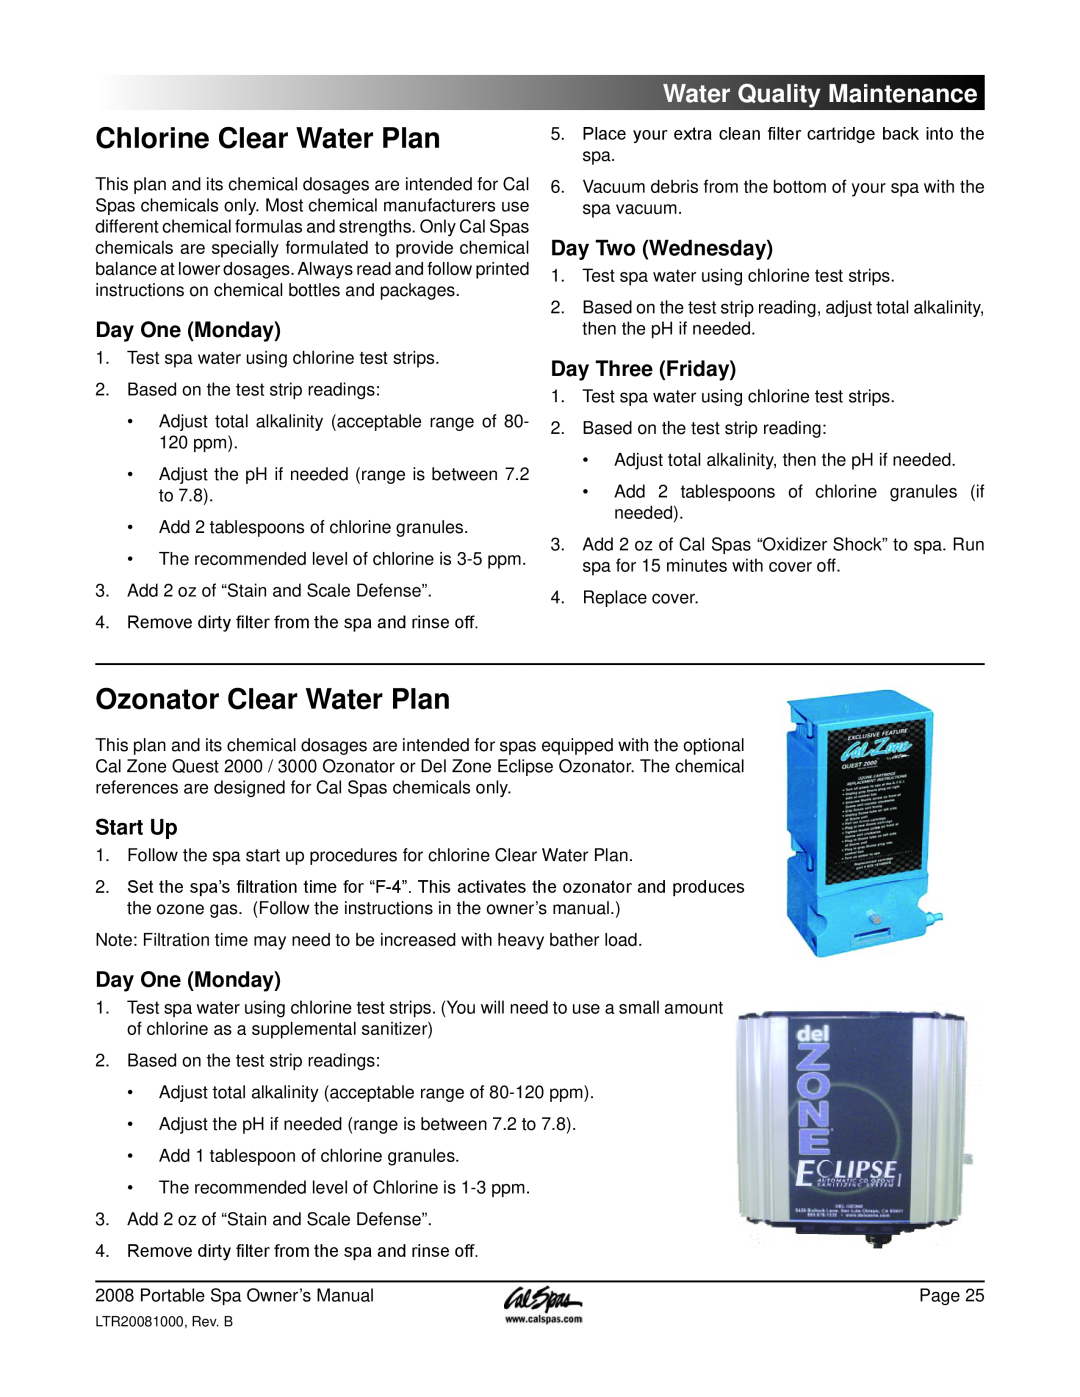 Cal Spas 6300 Chlorine Clear Water Plan, Ozonator Clear Water Plan, Day One Monday, Day Two Wednesday, Day Three Friday 